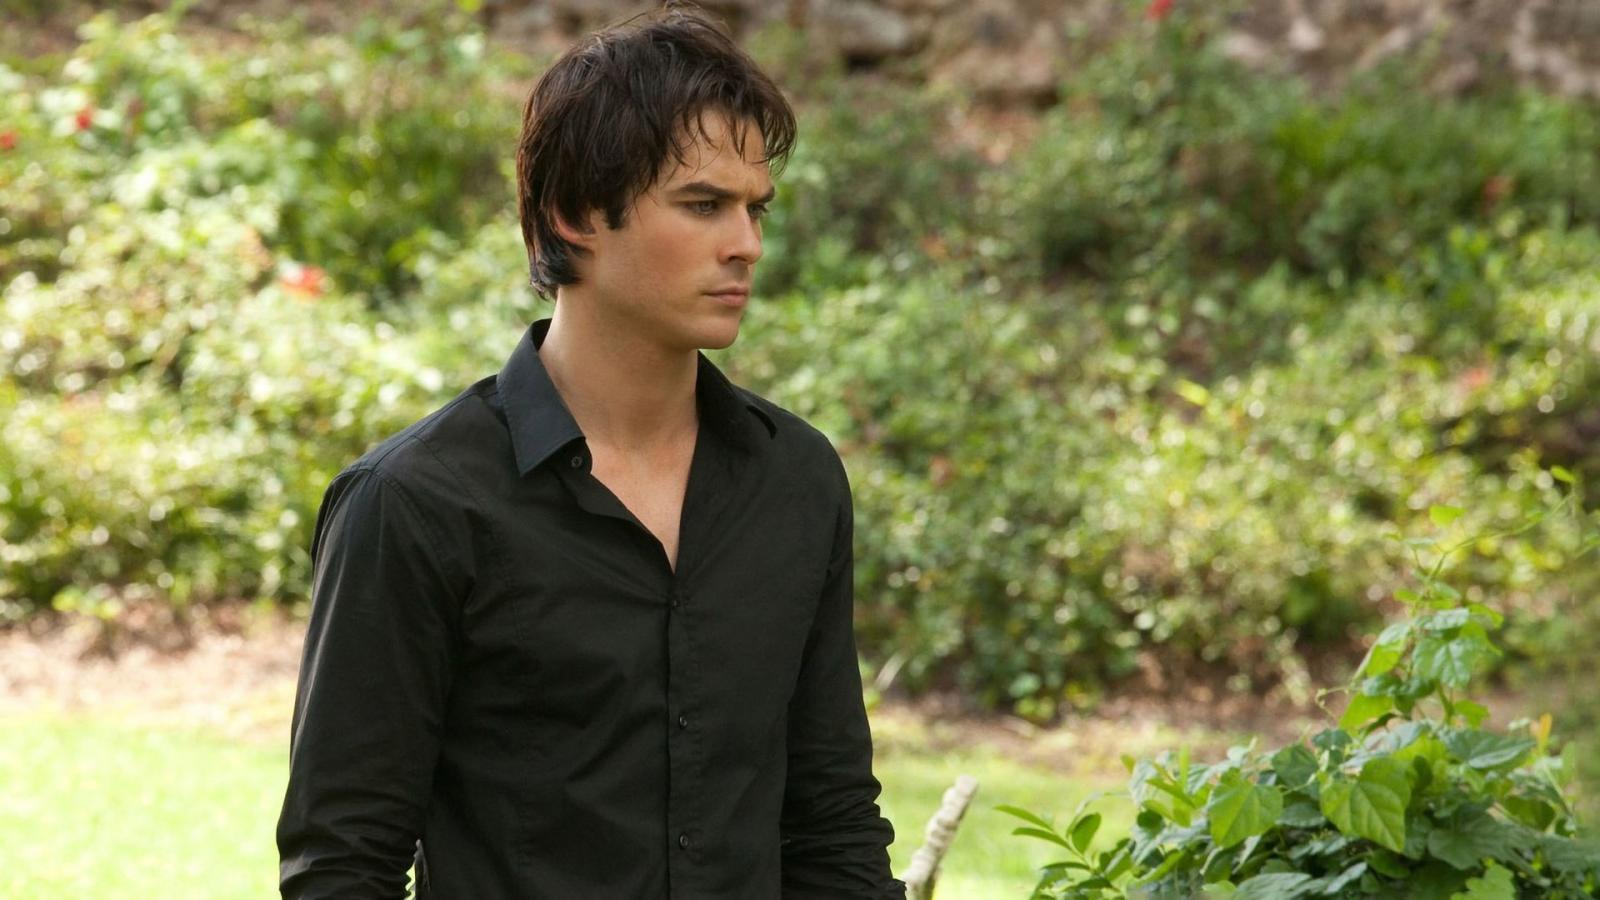 10 Hottest The Vampire Diaries Characters, Ranked by Reddit - image 10